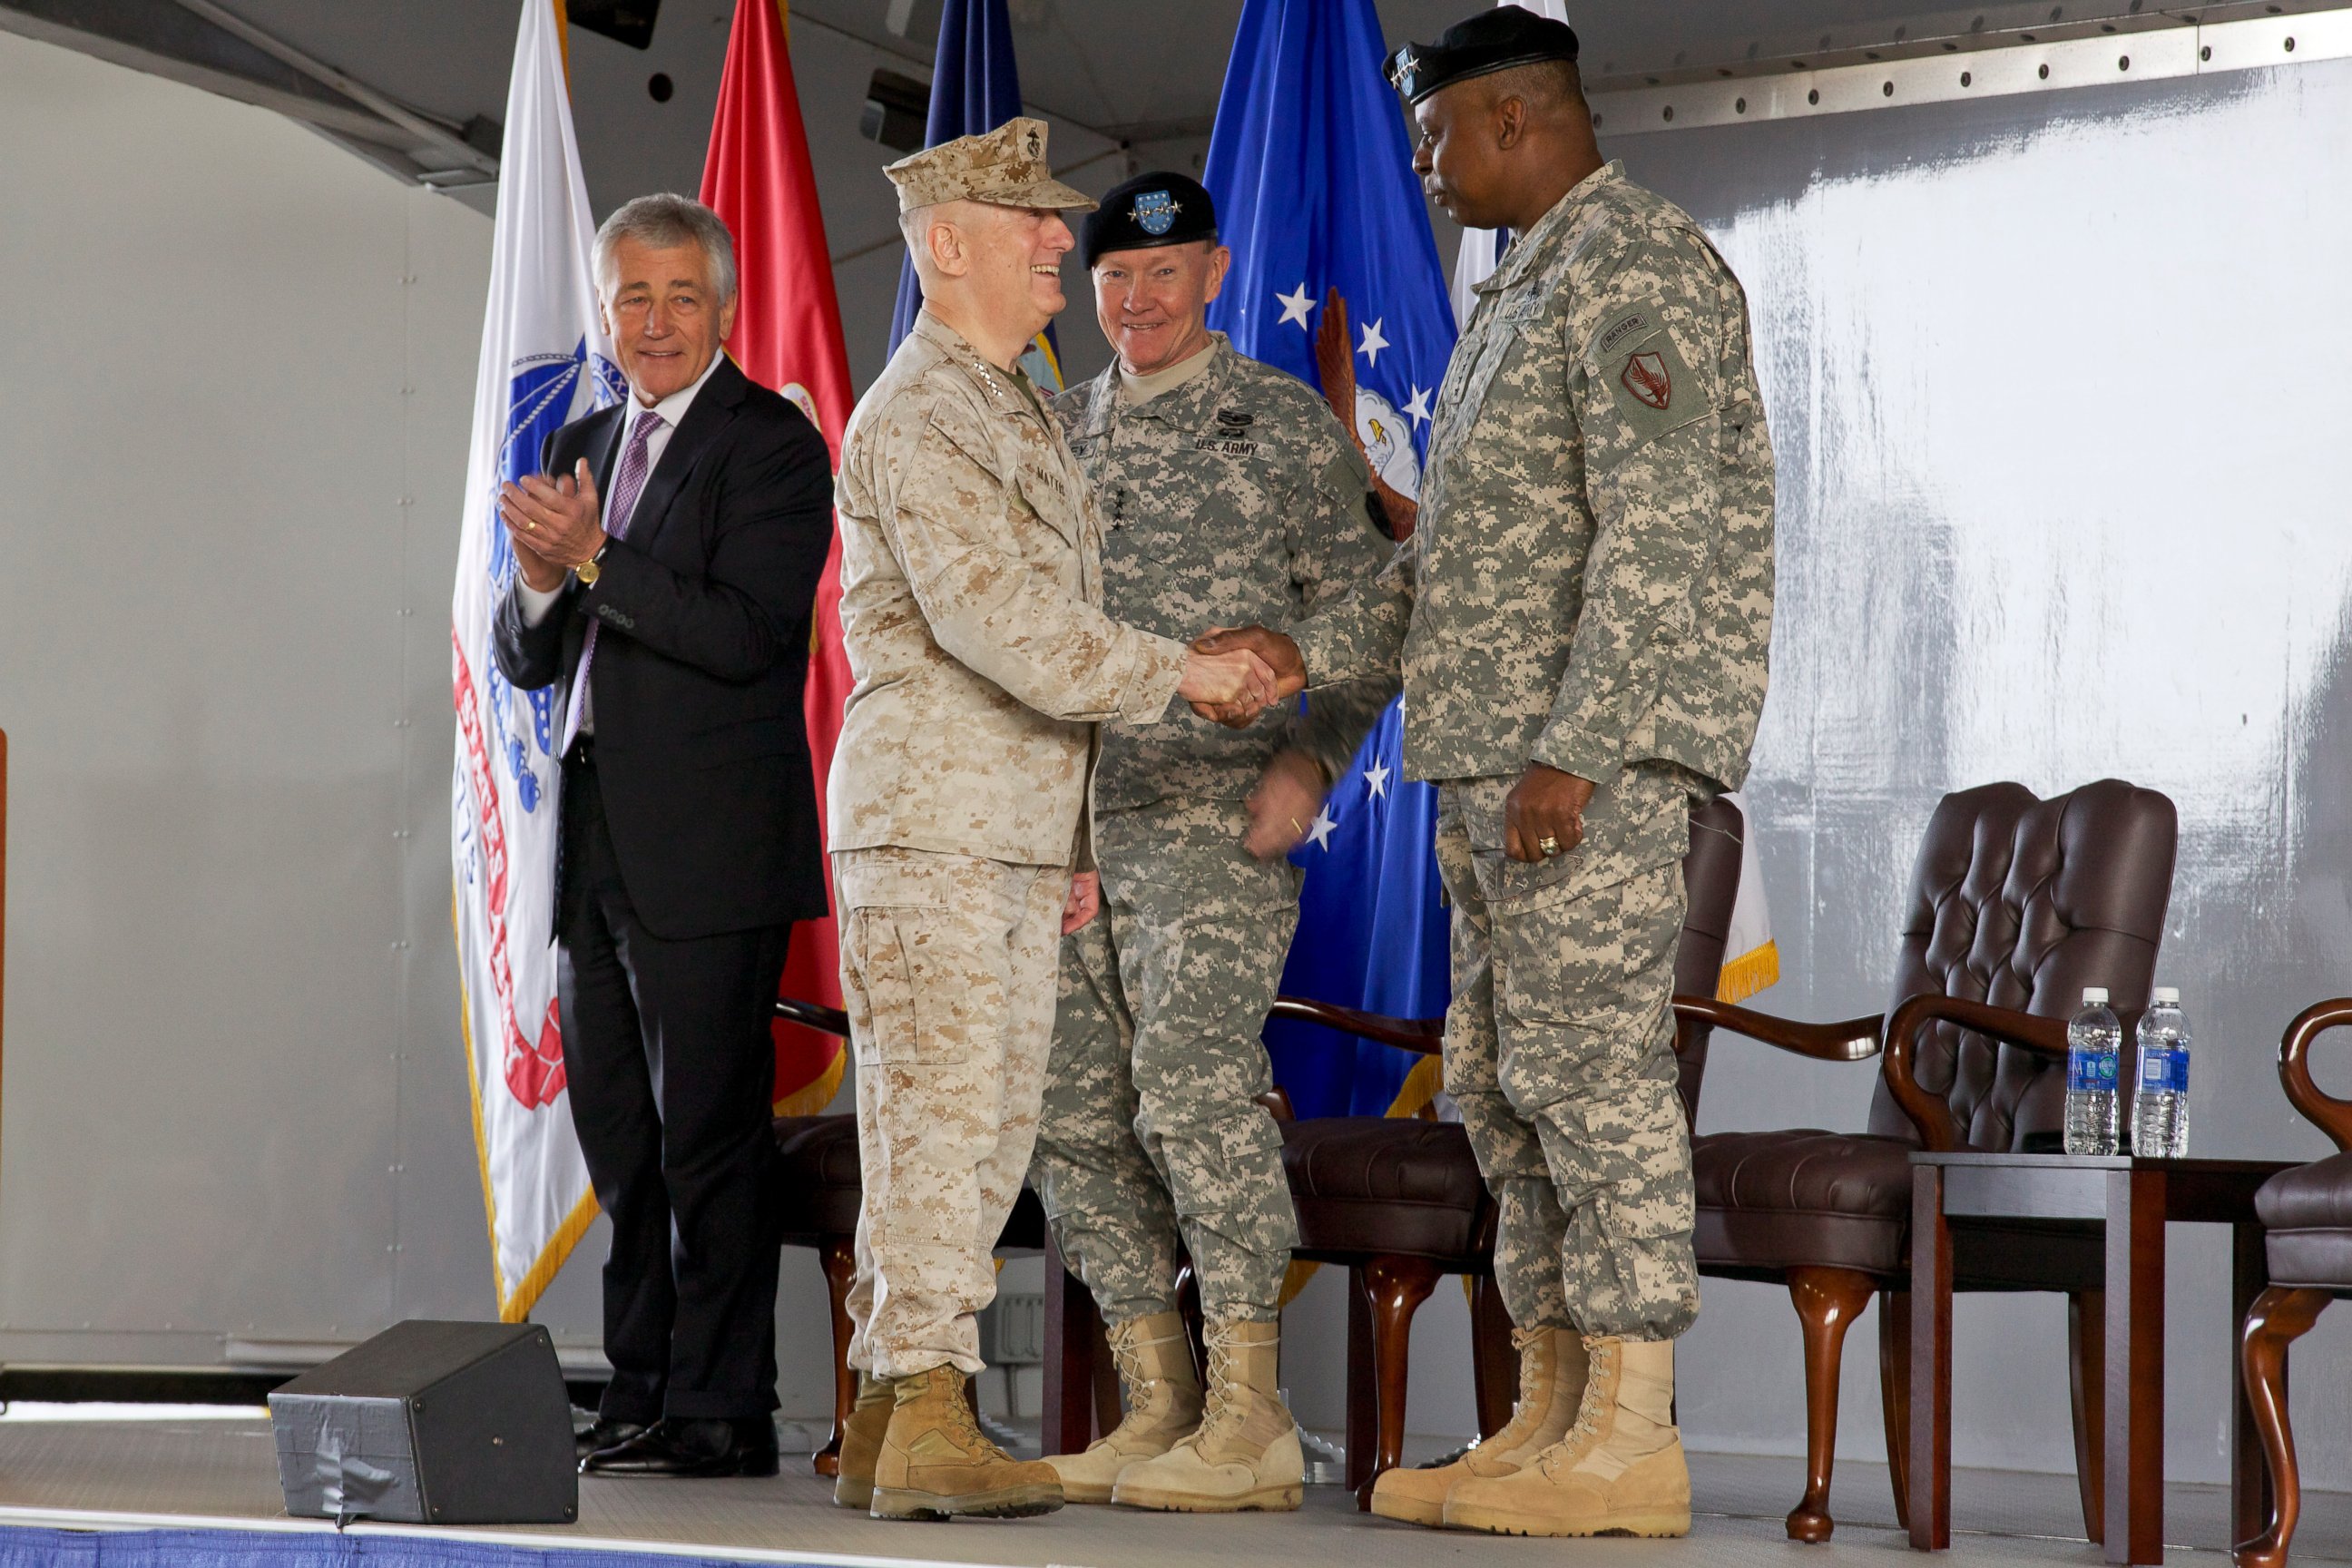 PHOTO: U.S. Marine Corps Gen. James N. Mattis, left foreground, shakes hands with Army Gen. Lloyd J. Austin III during the U.S. Central Command change of command ceremony March 22, 2013, at MacDill Air Force Base, Fla.